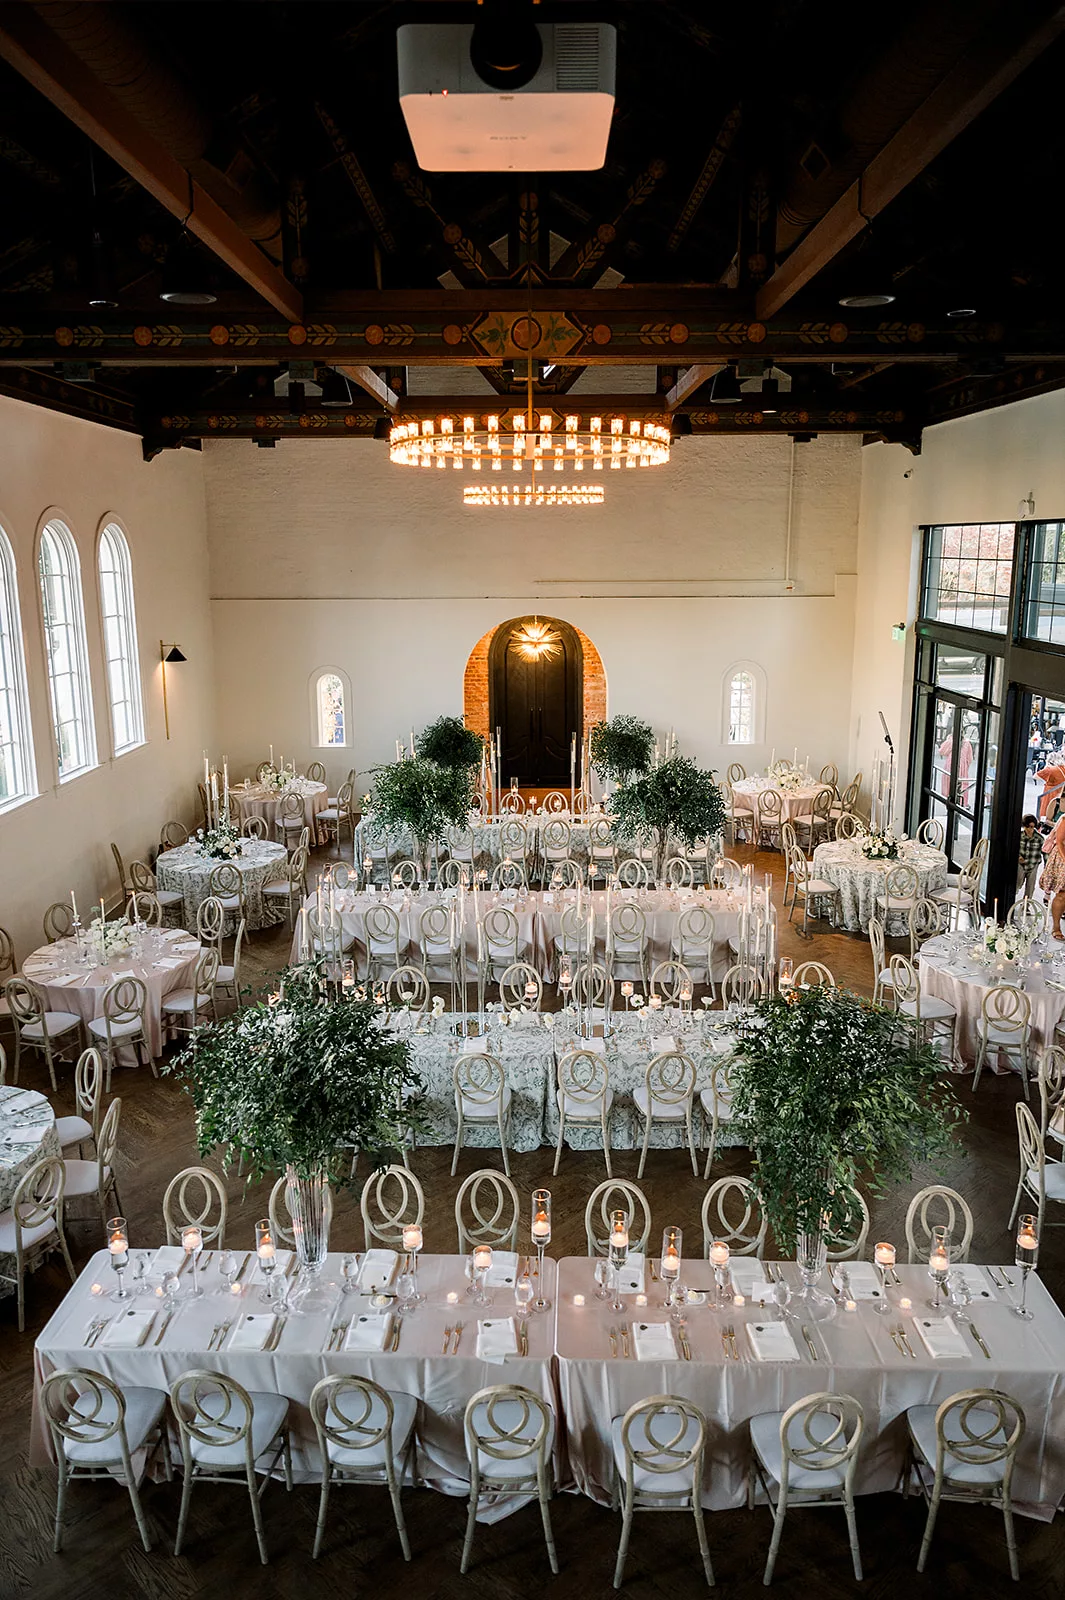 Above look at a wedding reception set up indoors with tall centerpieces and floral linens